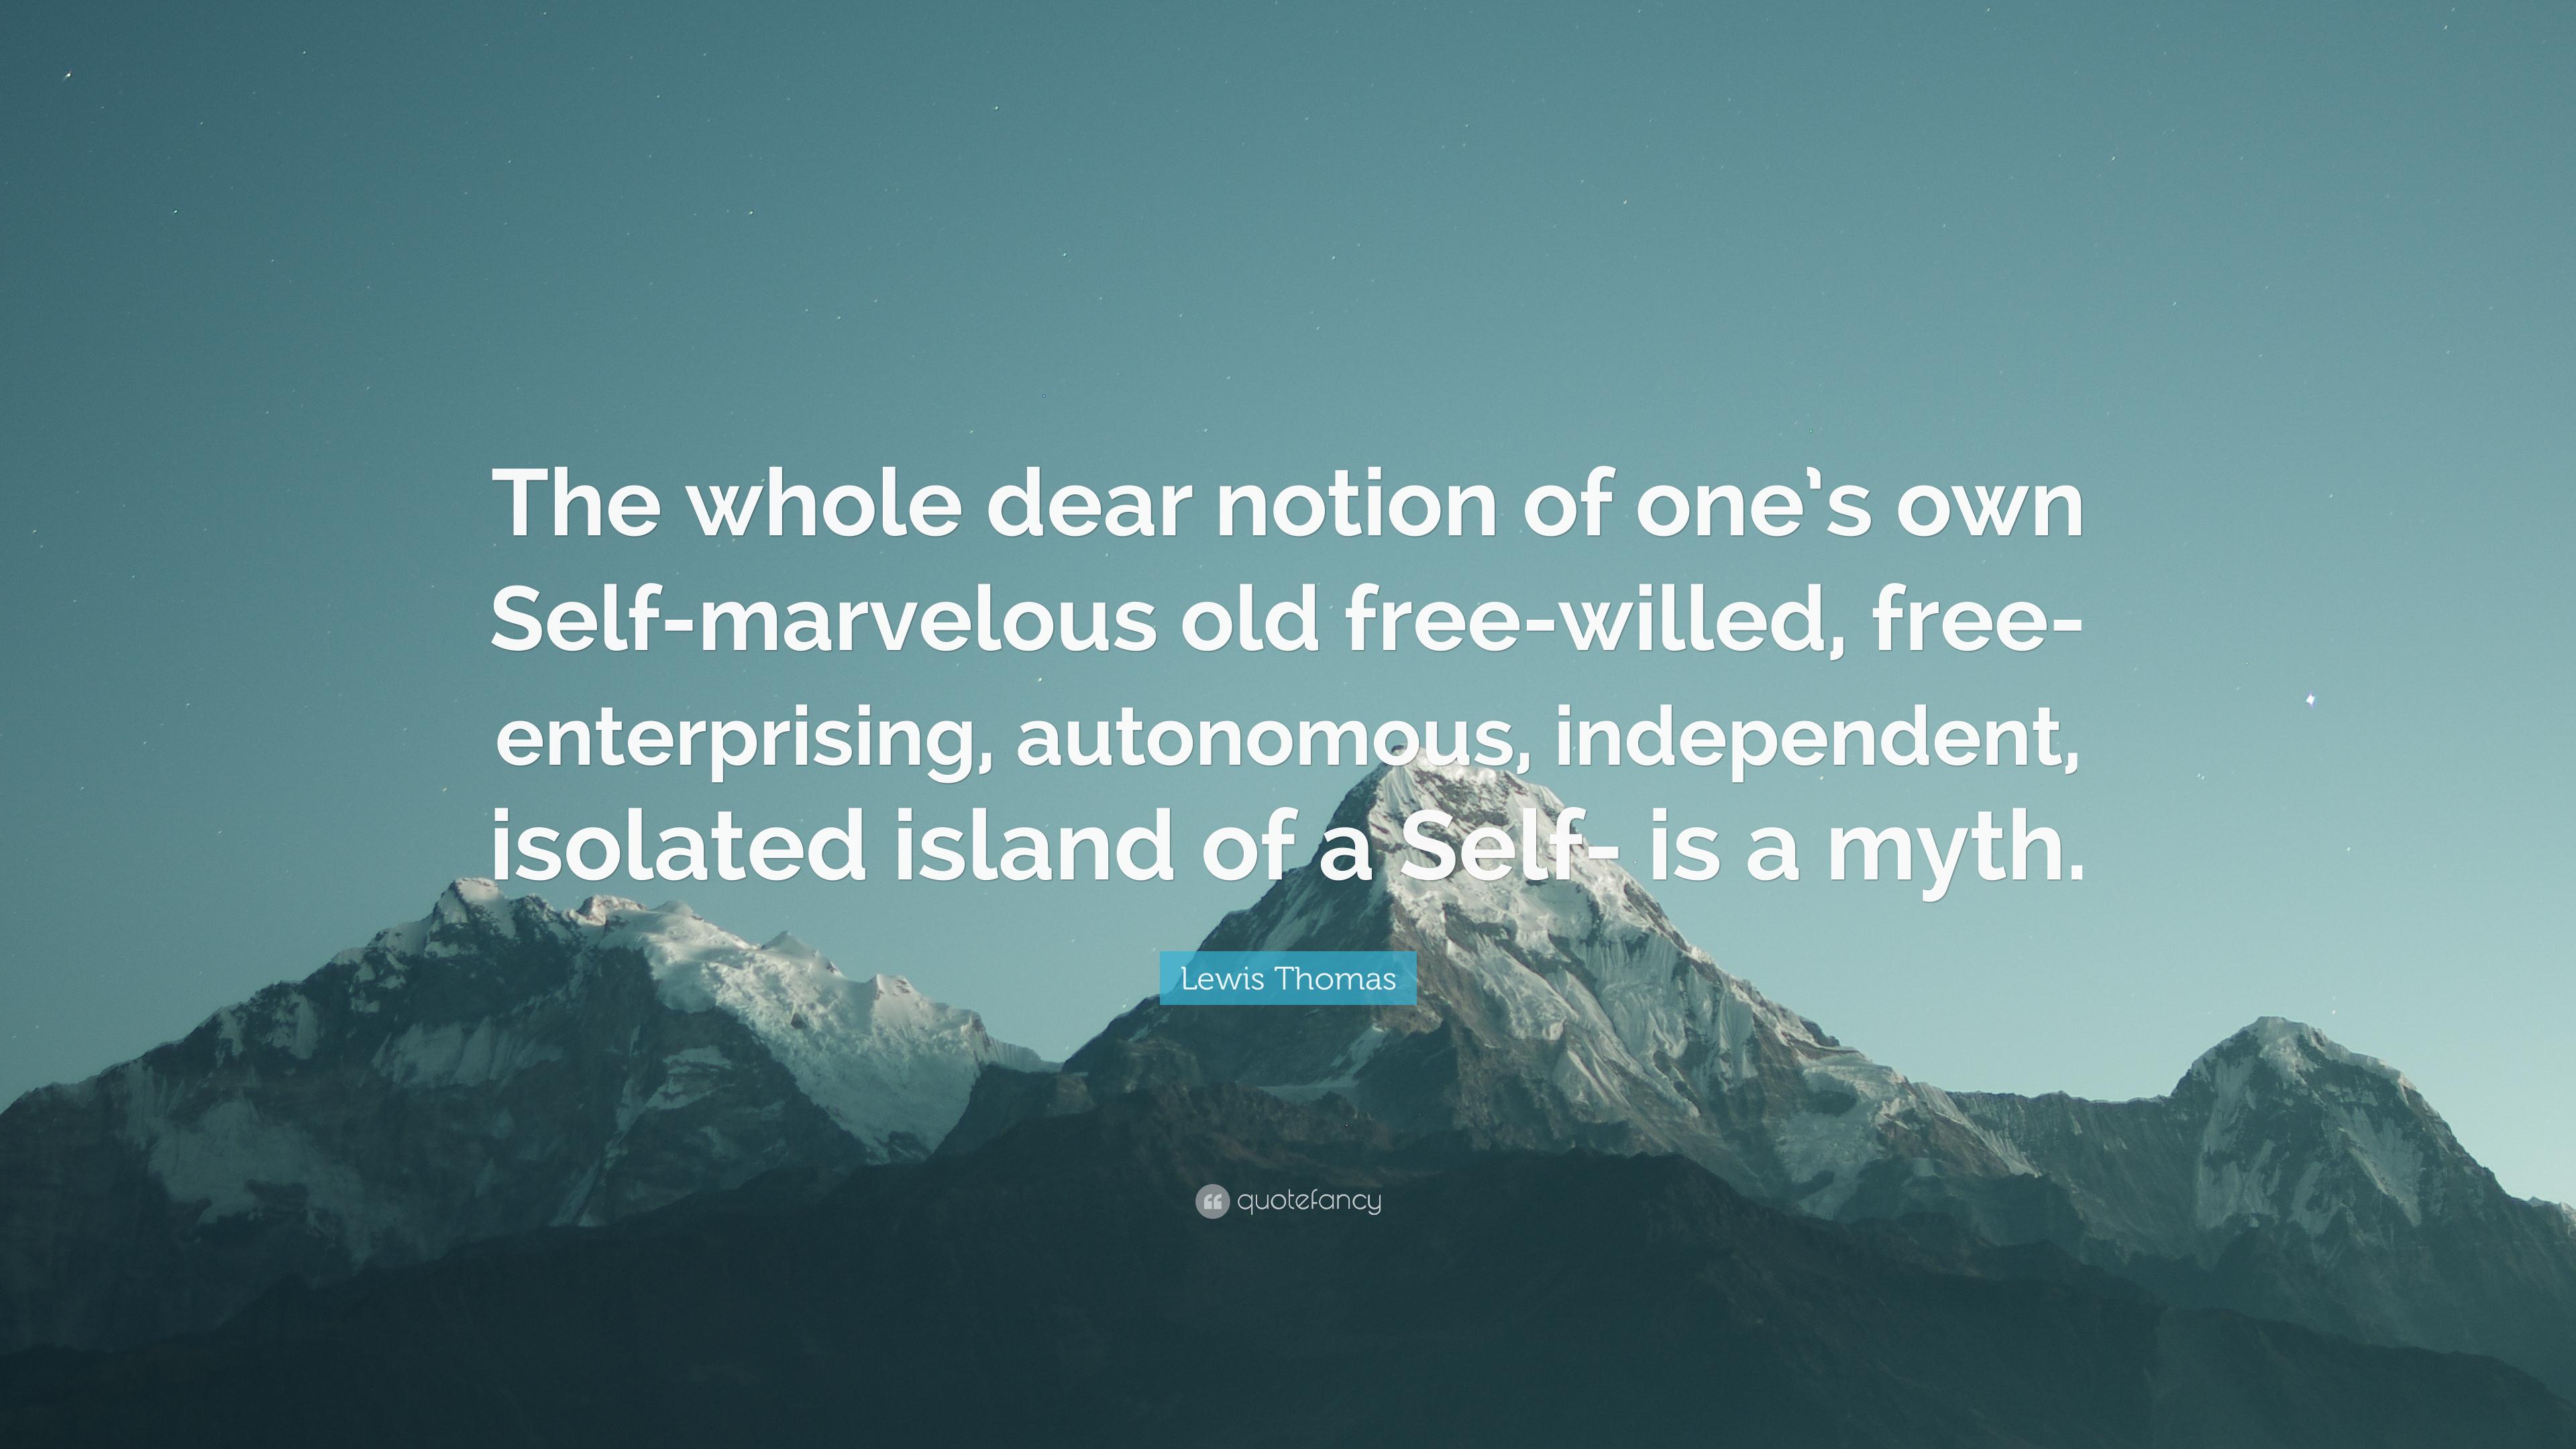 Lewis Thomas Quote: “The whole dear notion of one's own Self